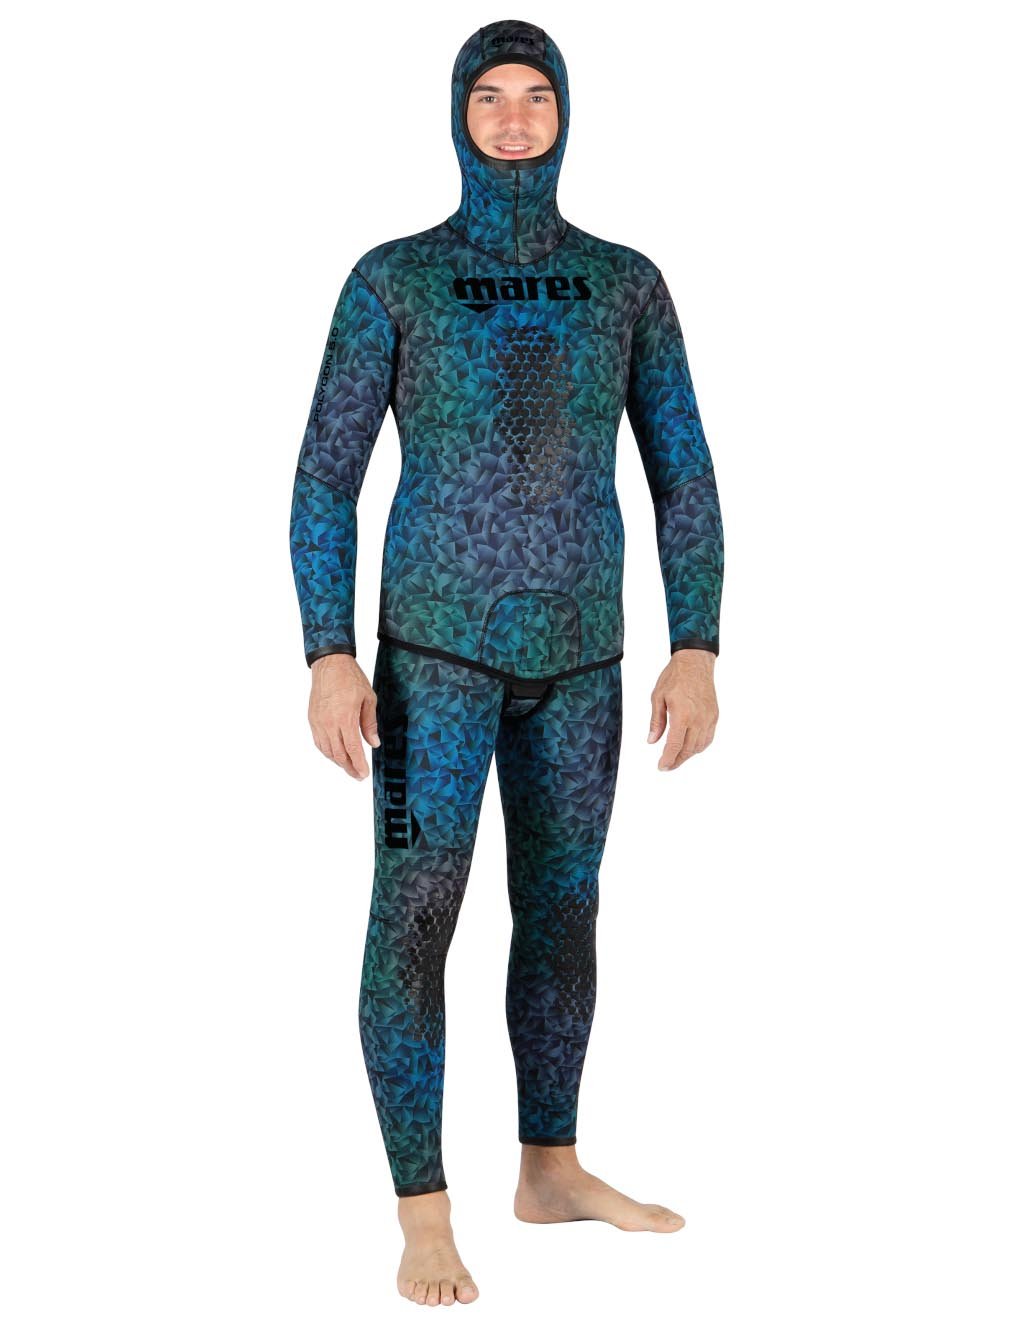 Oblek na freediving POLYGON 30 (Open Cell 3 mm)